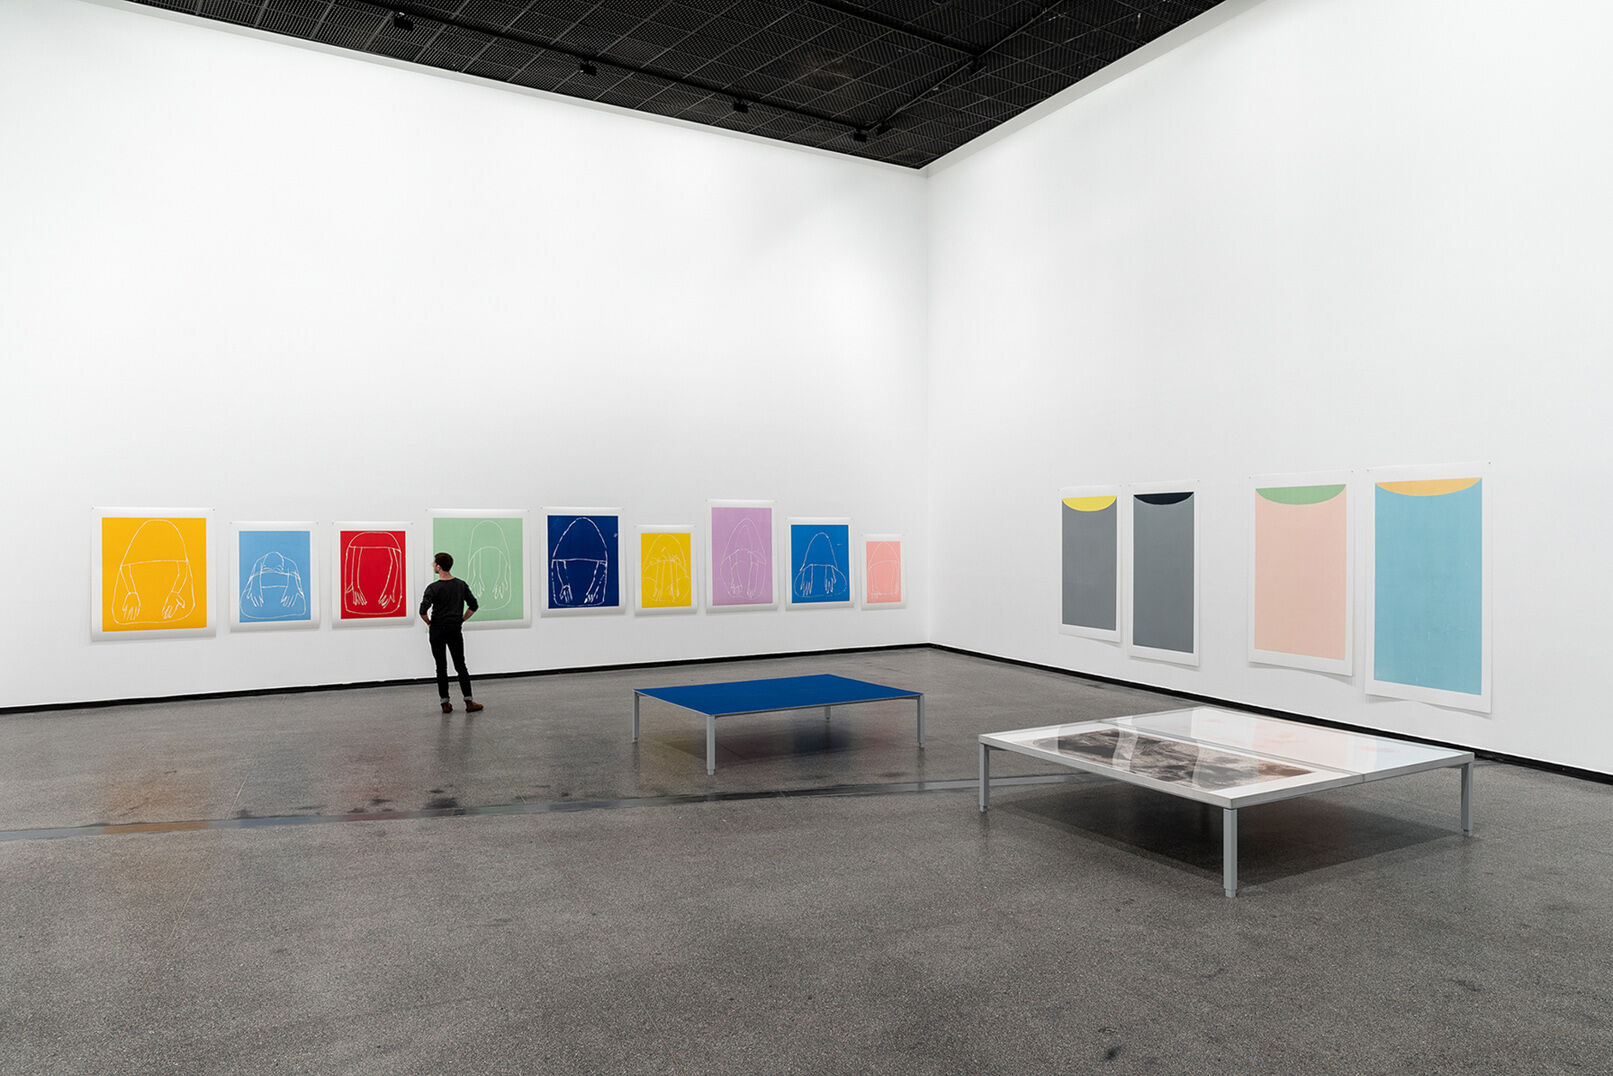 Andrea Büttner, installation view, in On Vulnerability and Doubt, Australian Centre for Contemporary Art, Melbourne, 2019. Photograph: Andrew Curtis